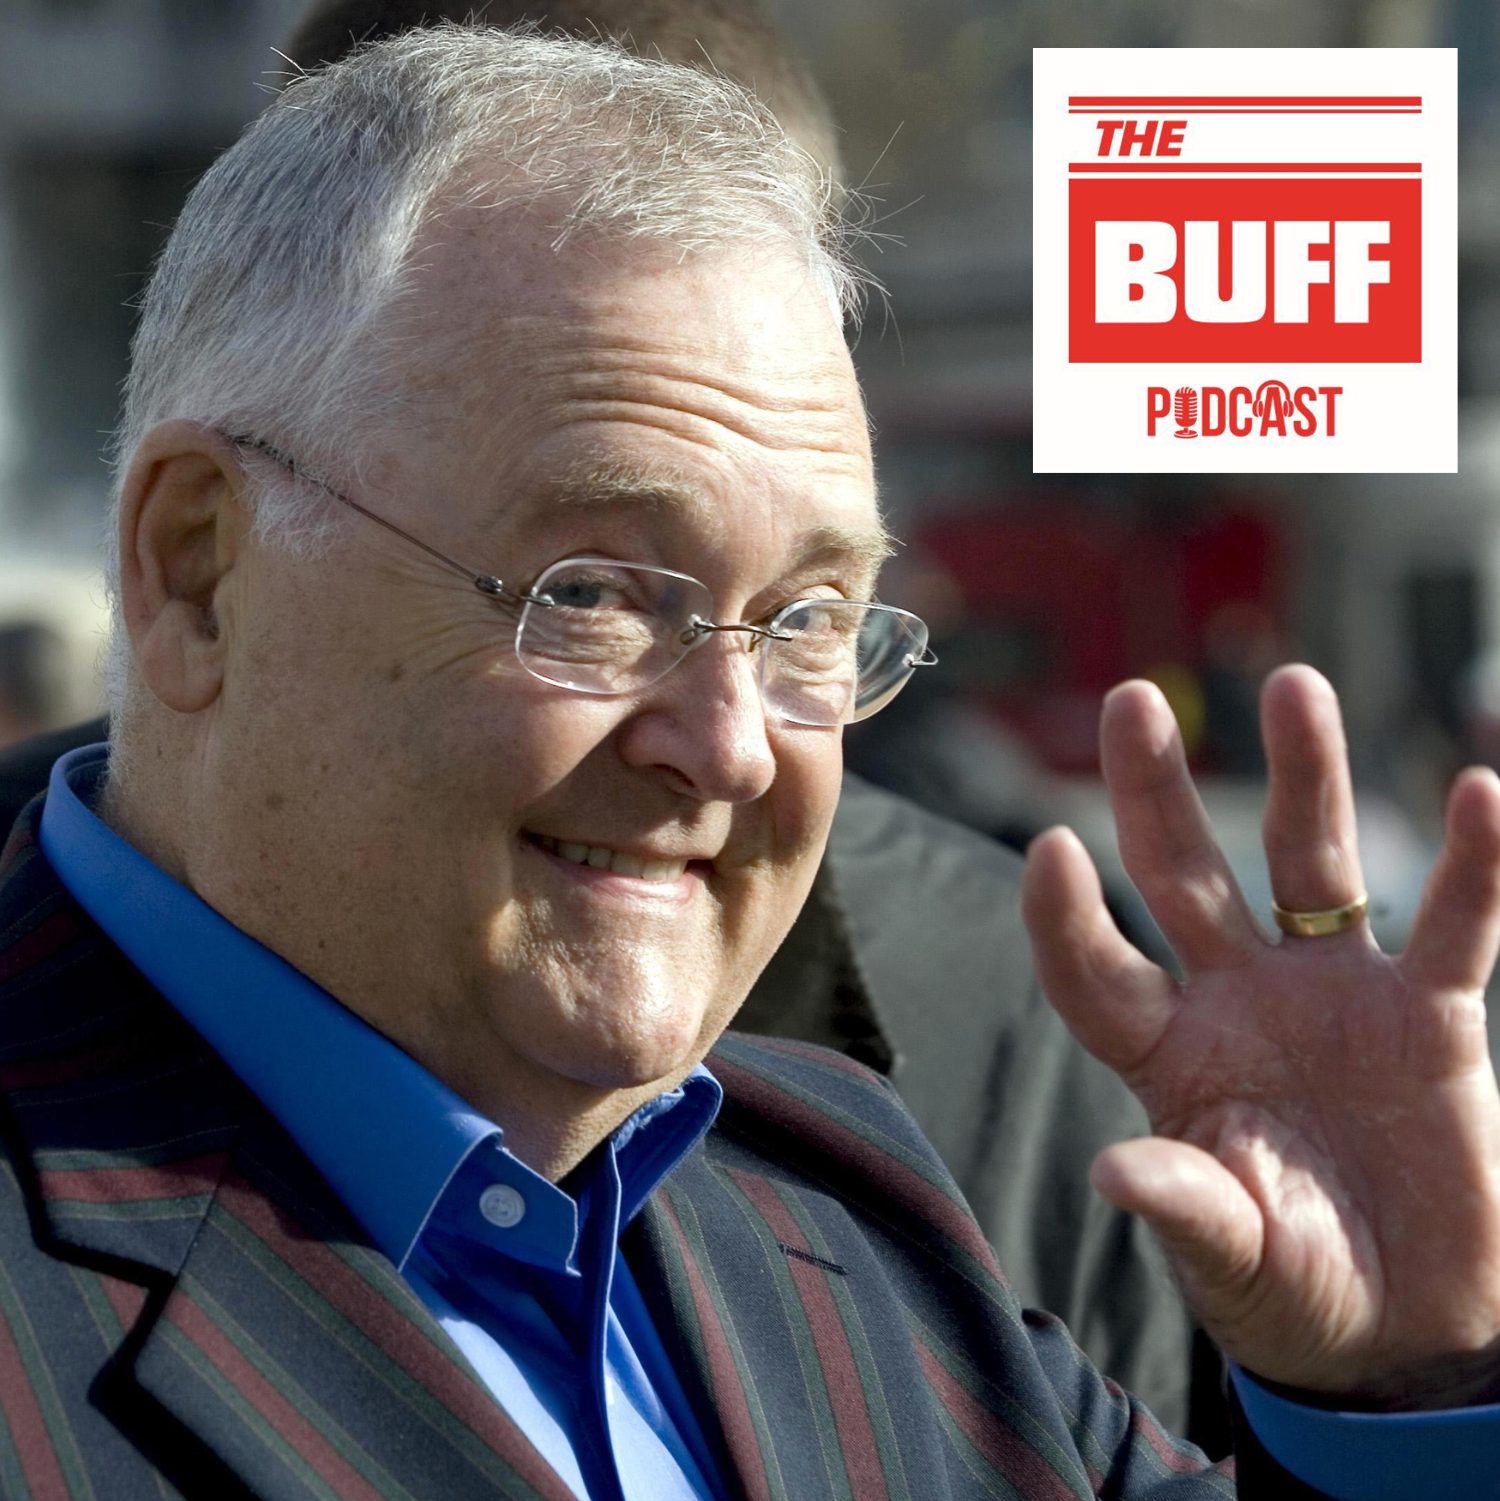 The Buff presents: Exeter, Oxford and Harold Bishop